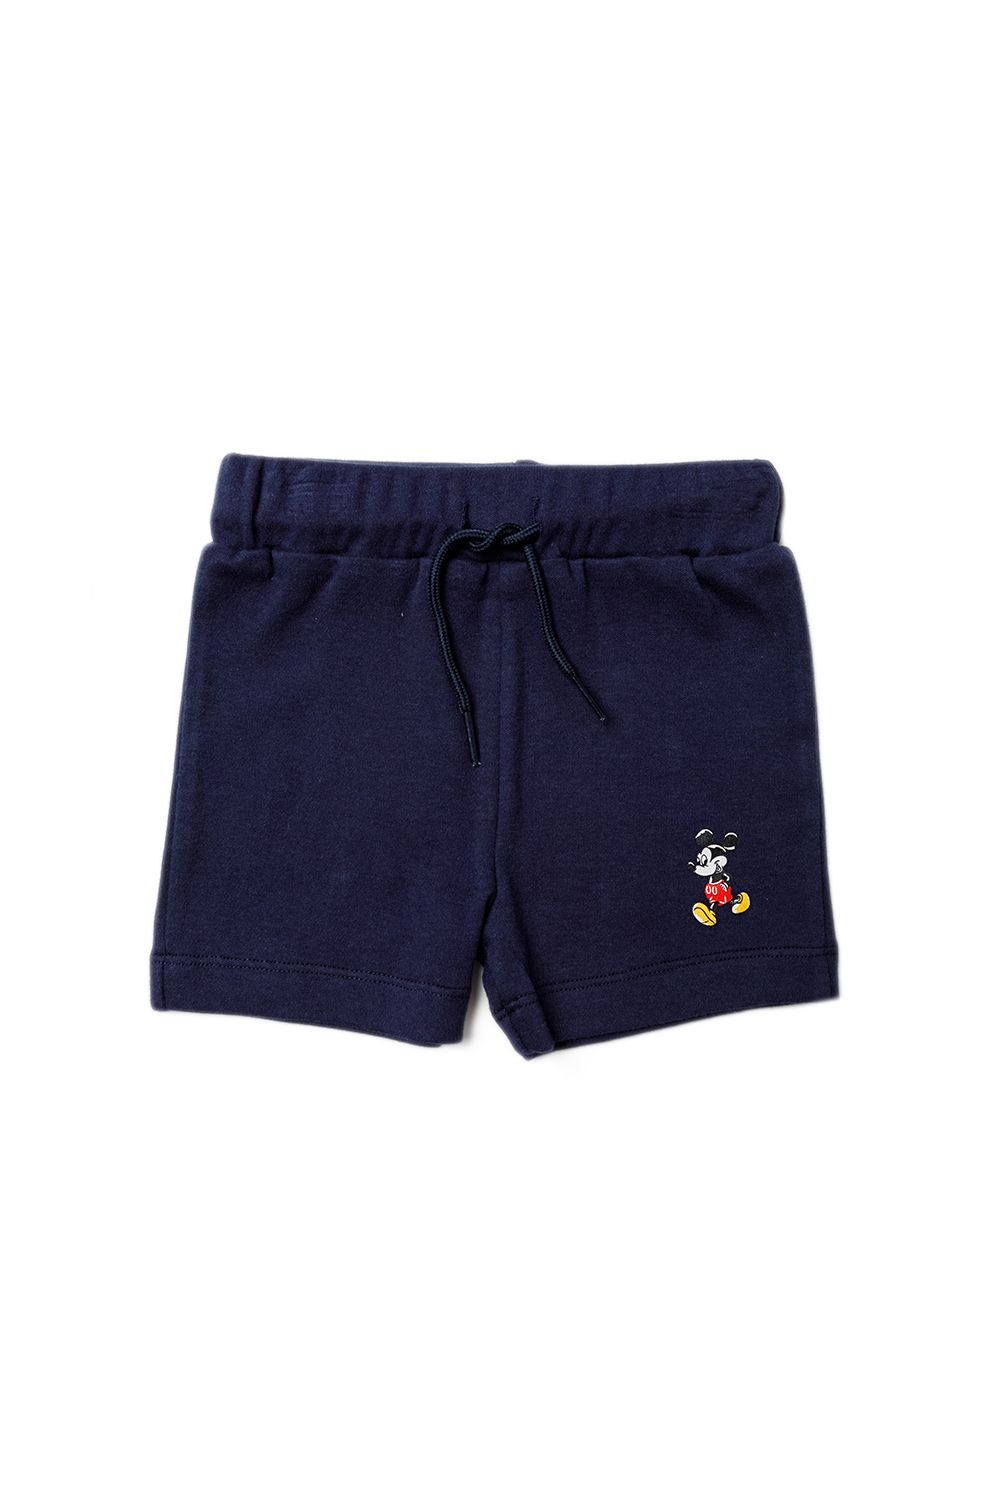 This adorable Disney Baby two-piece set features a classic Mickey Mouse print. The set includes a printed, button up shirt and a pair of drawstring shorts. Both the shirt and shorts are cotton, keeping your little one comfortable. This set would make a lovely gift or a new addition to your little ones wardrobe!